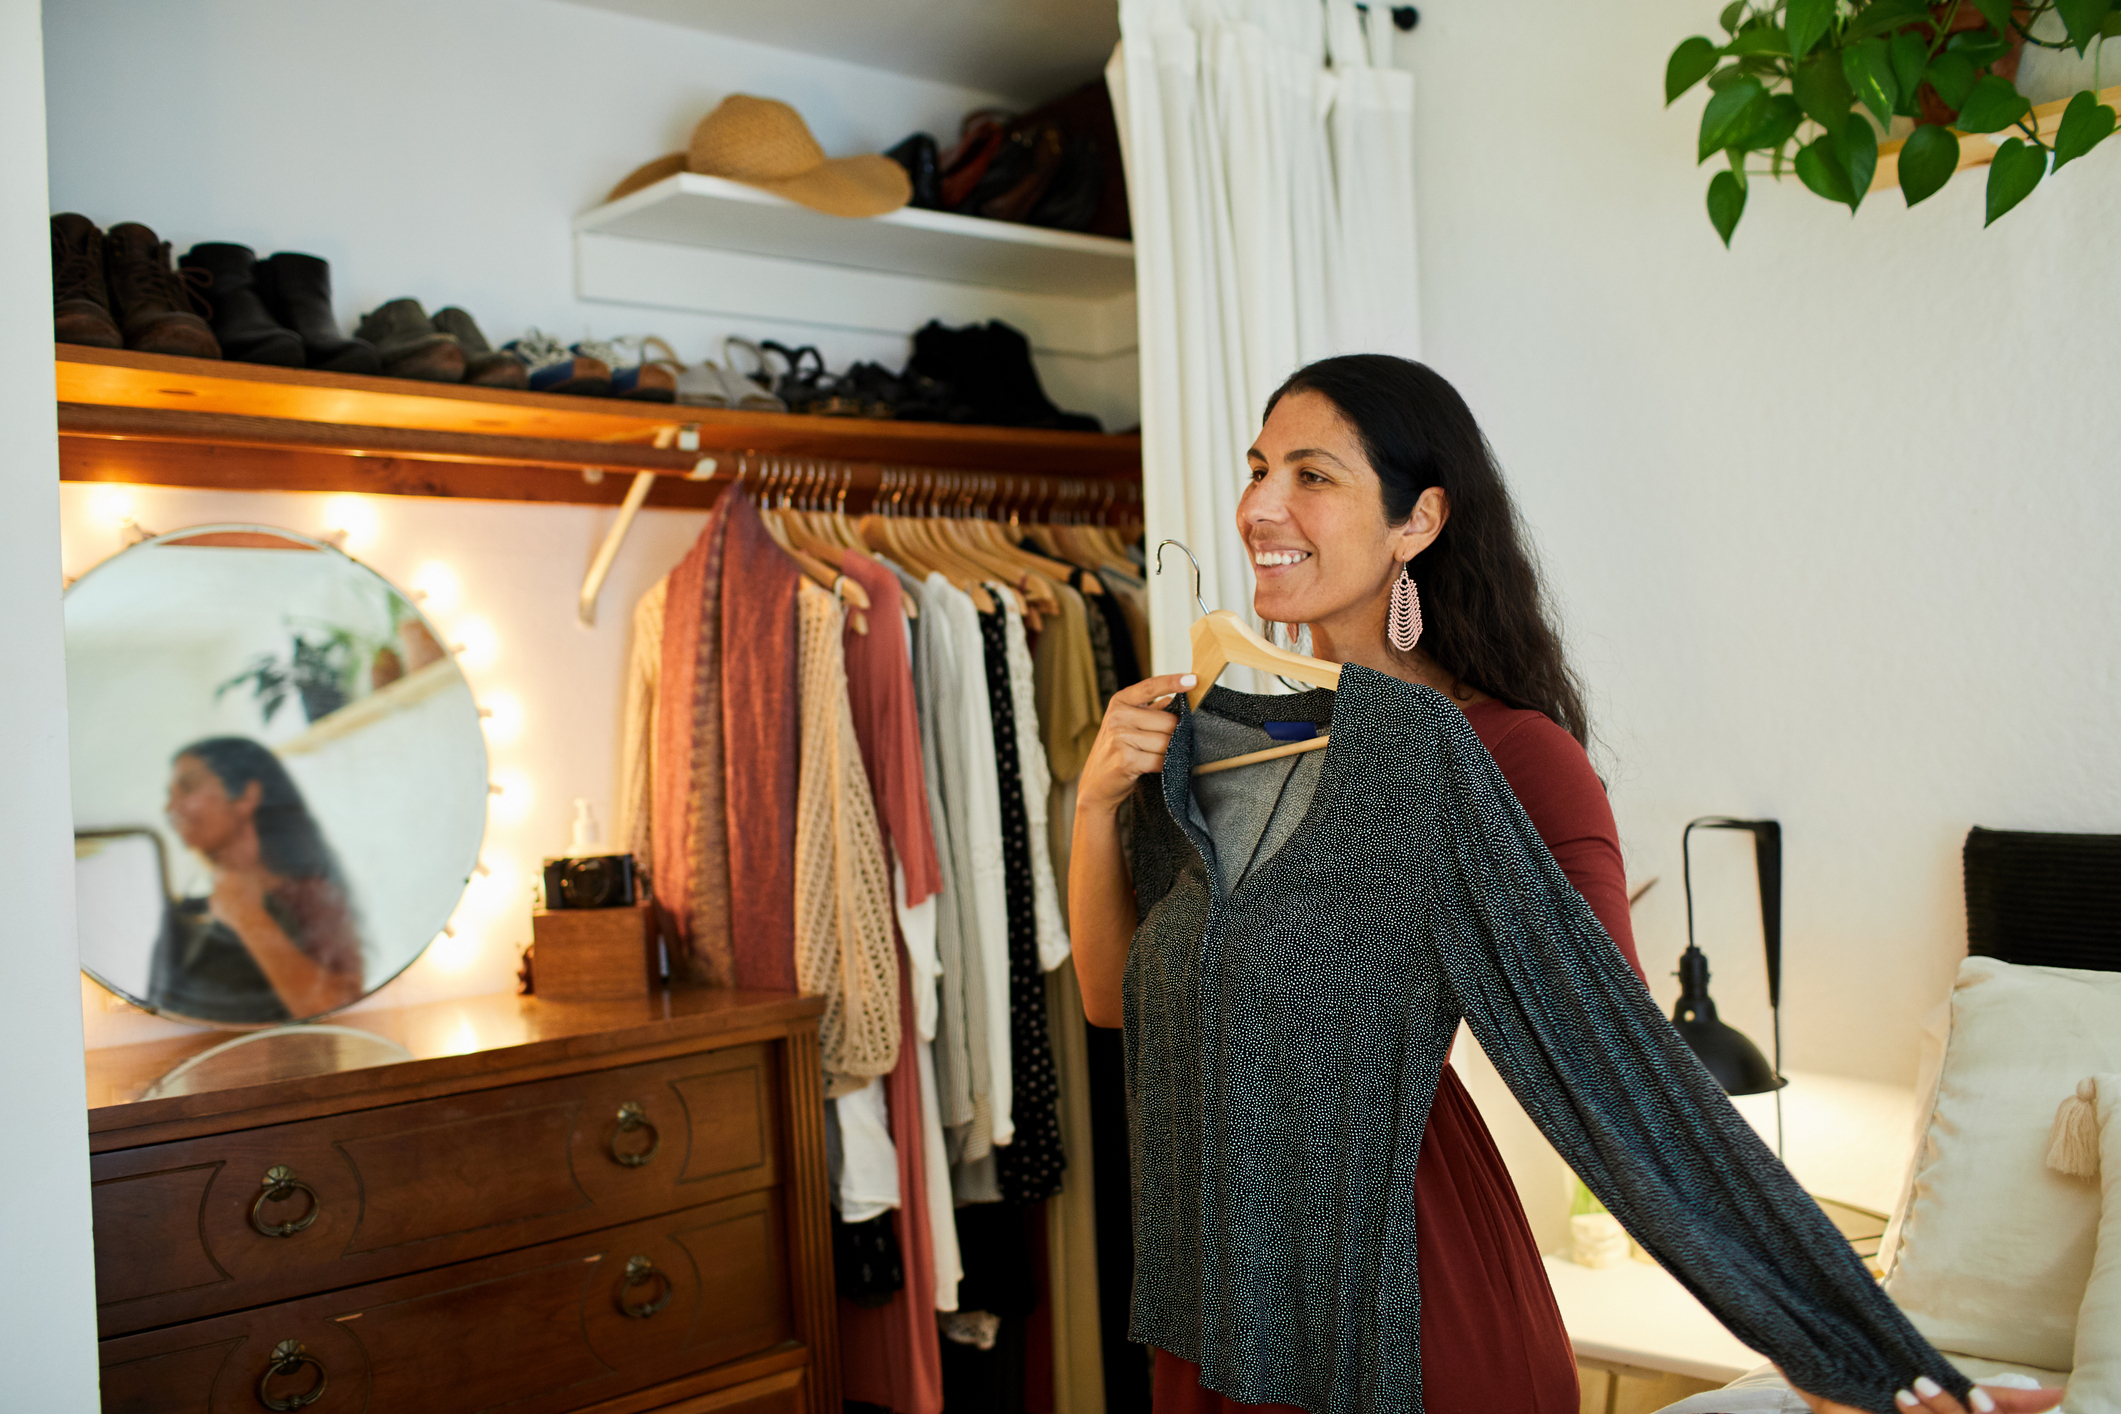 Woman smiling, holding a shirt, standing by a mirror and wardrobe, reflecting environmentally friendly fashion choices